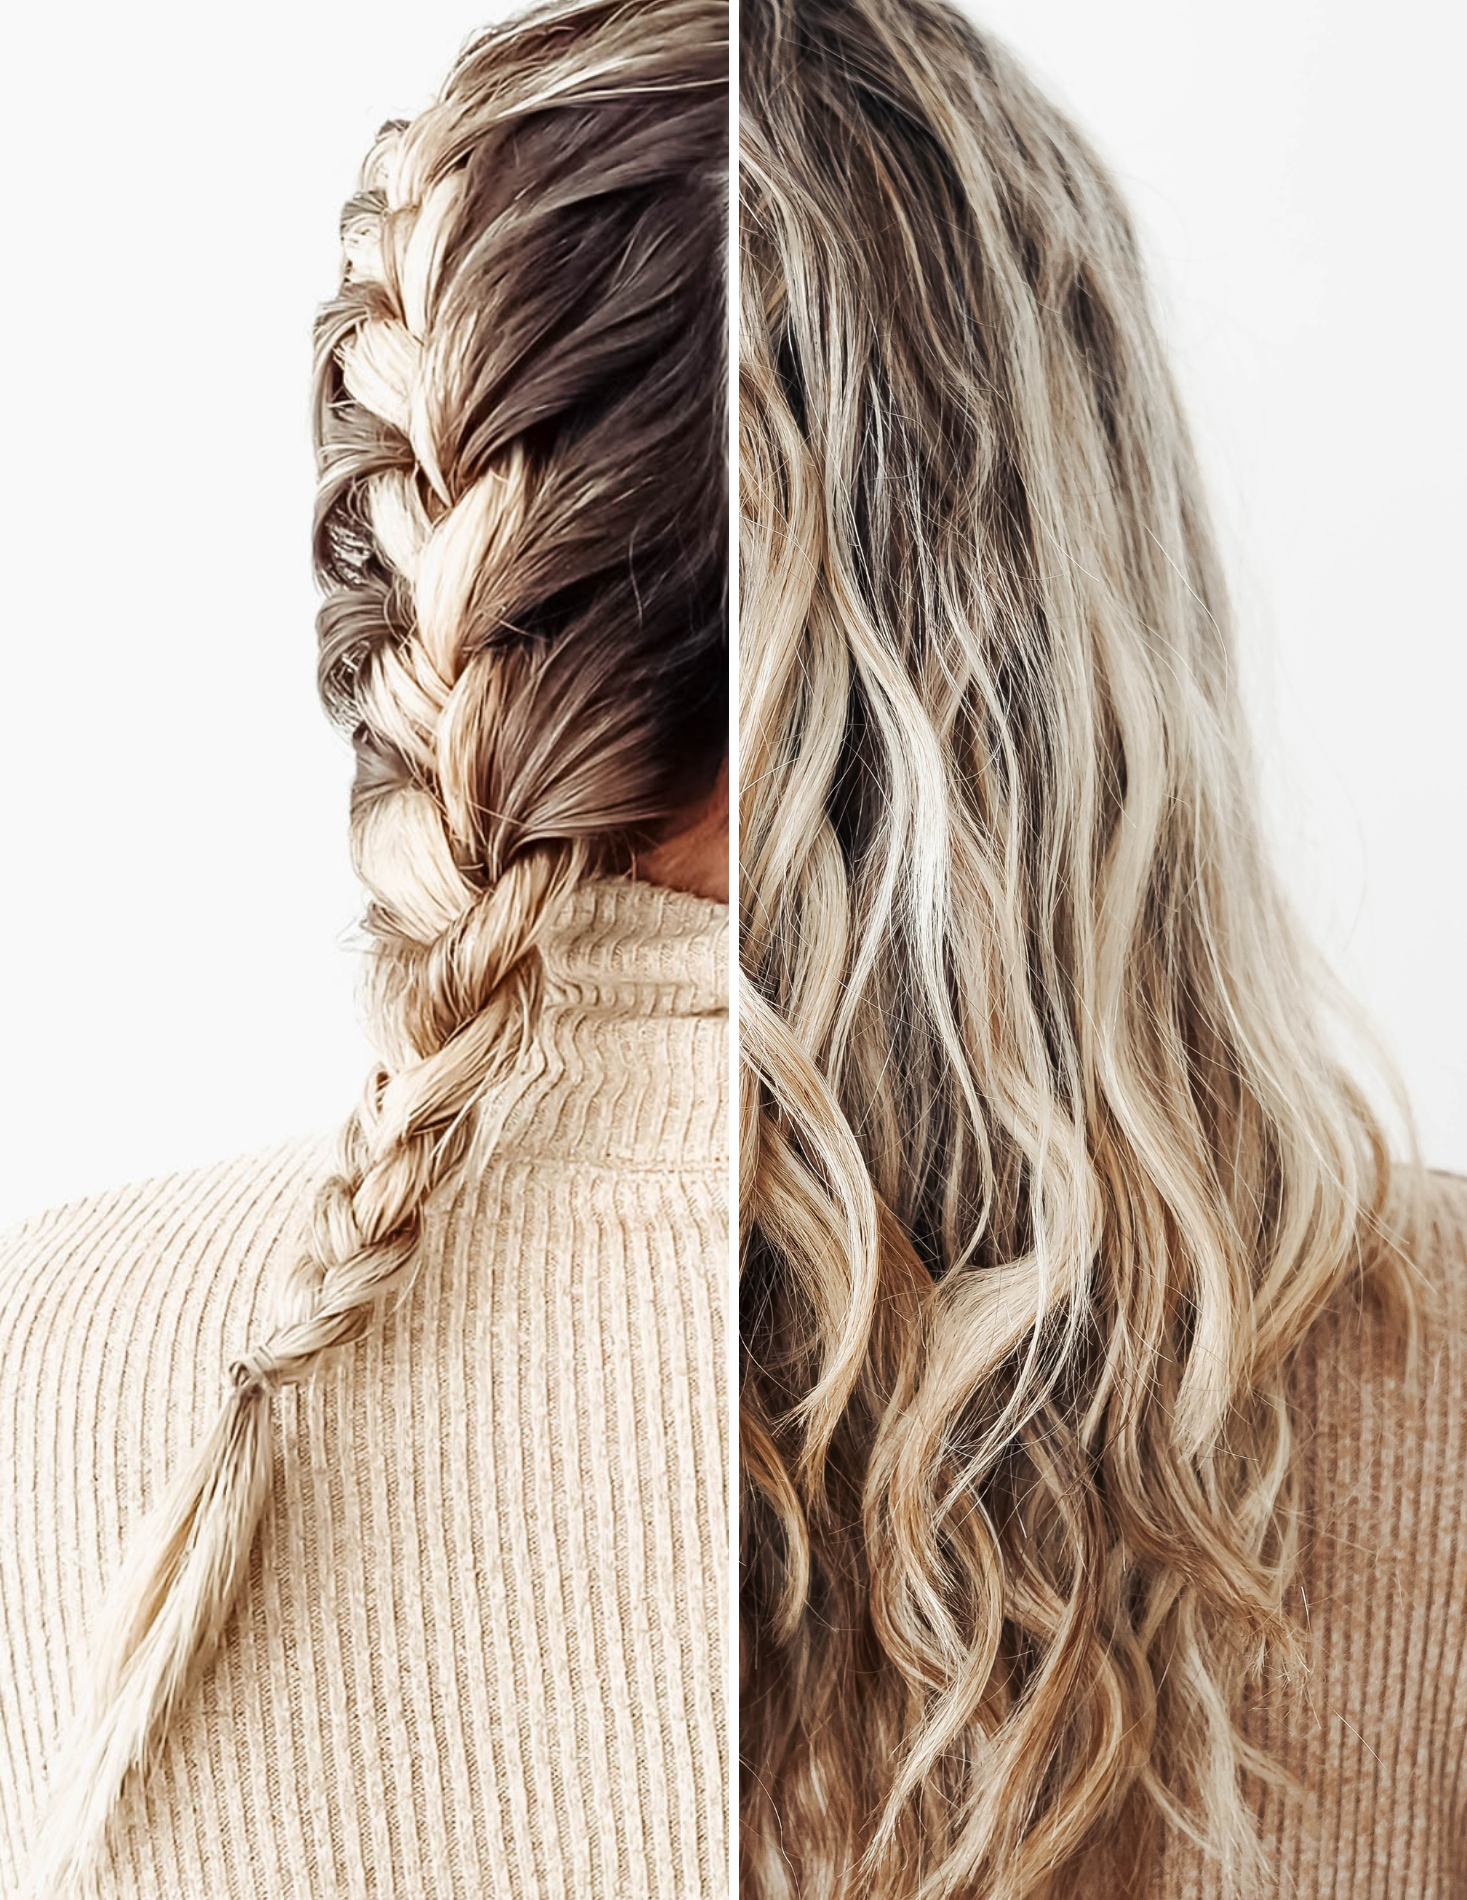 How to French Braid Hair: An Easy Step-by-Step Guide